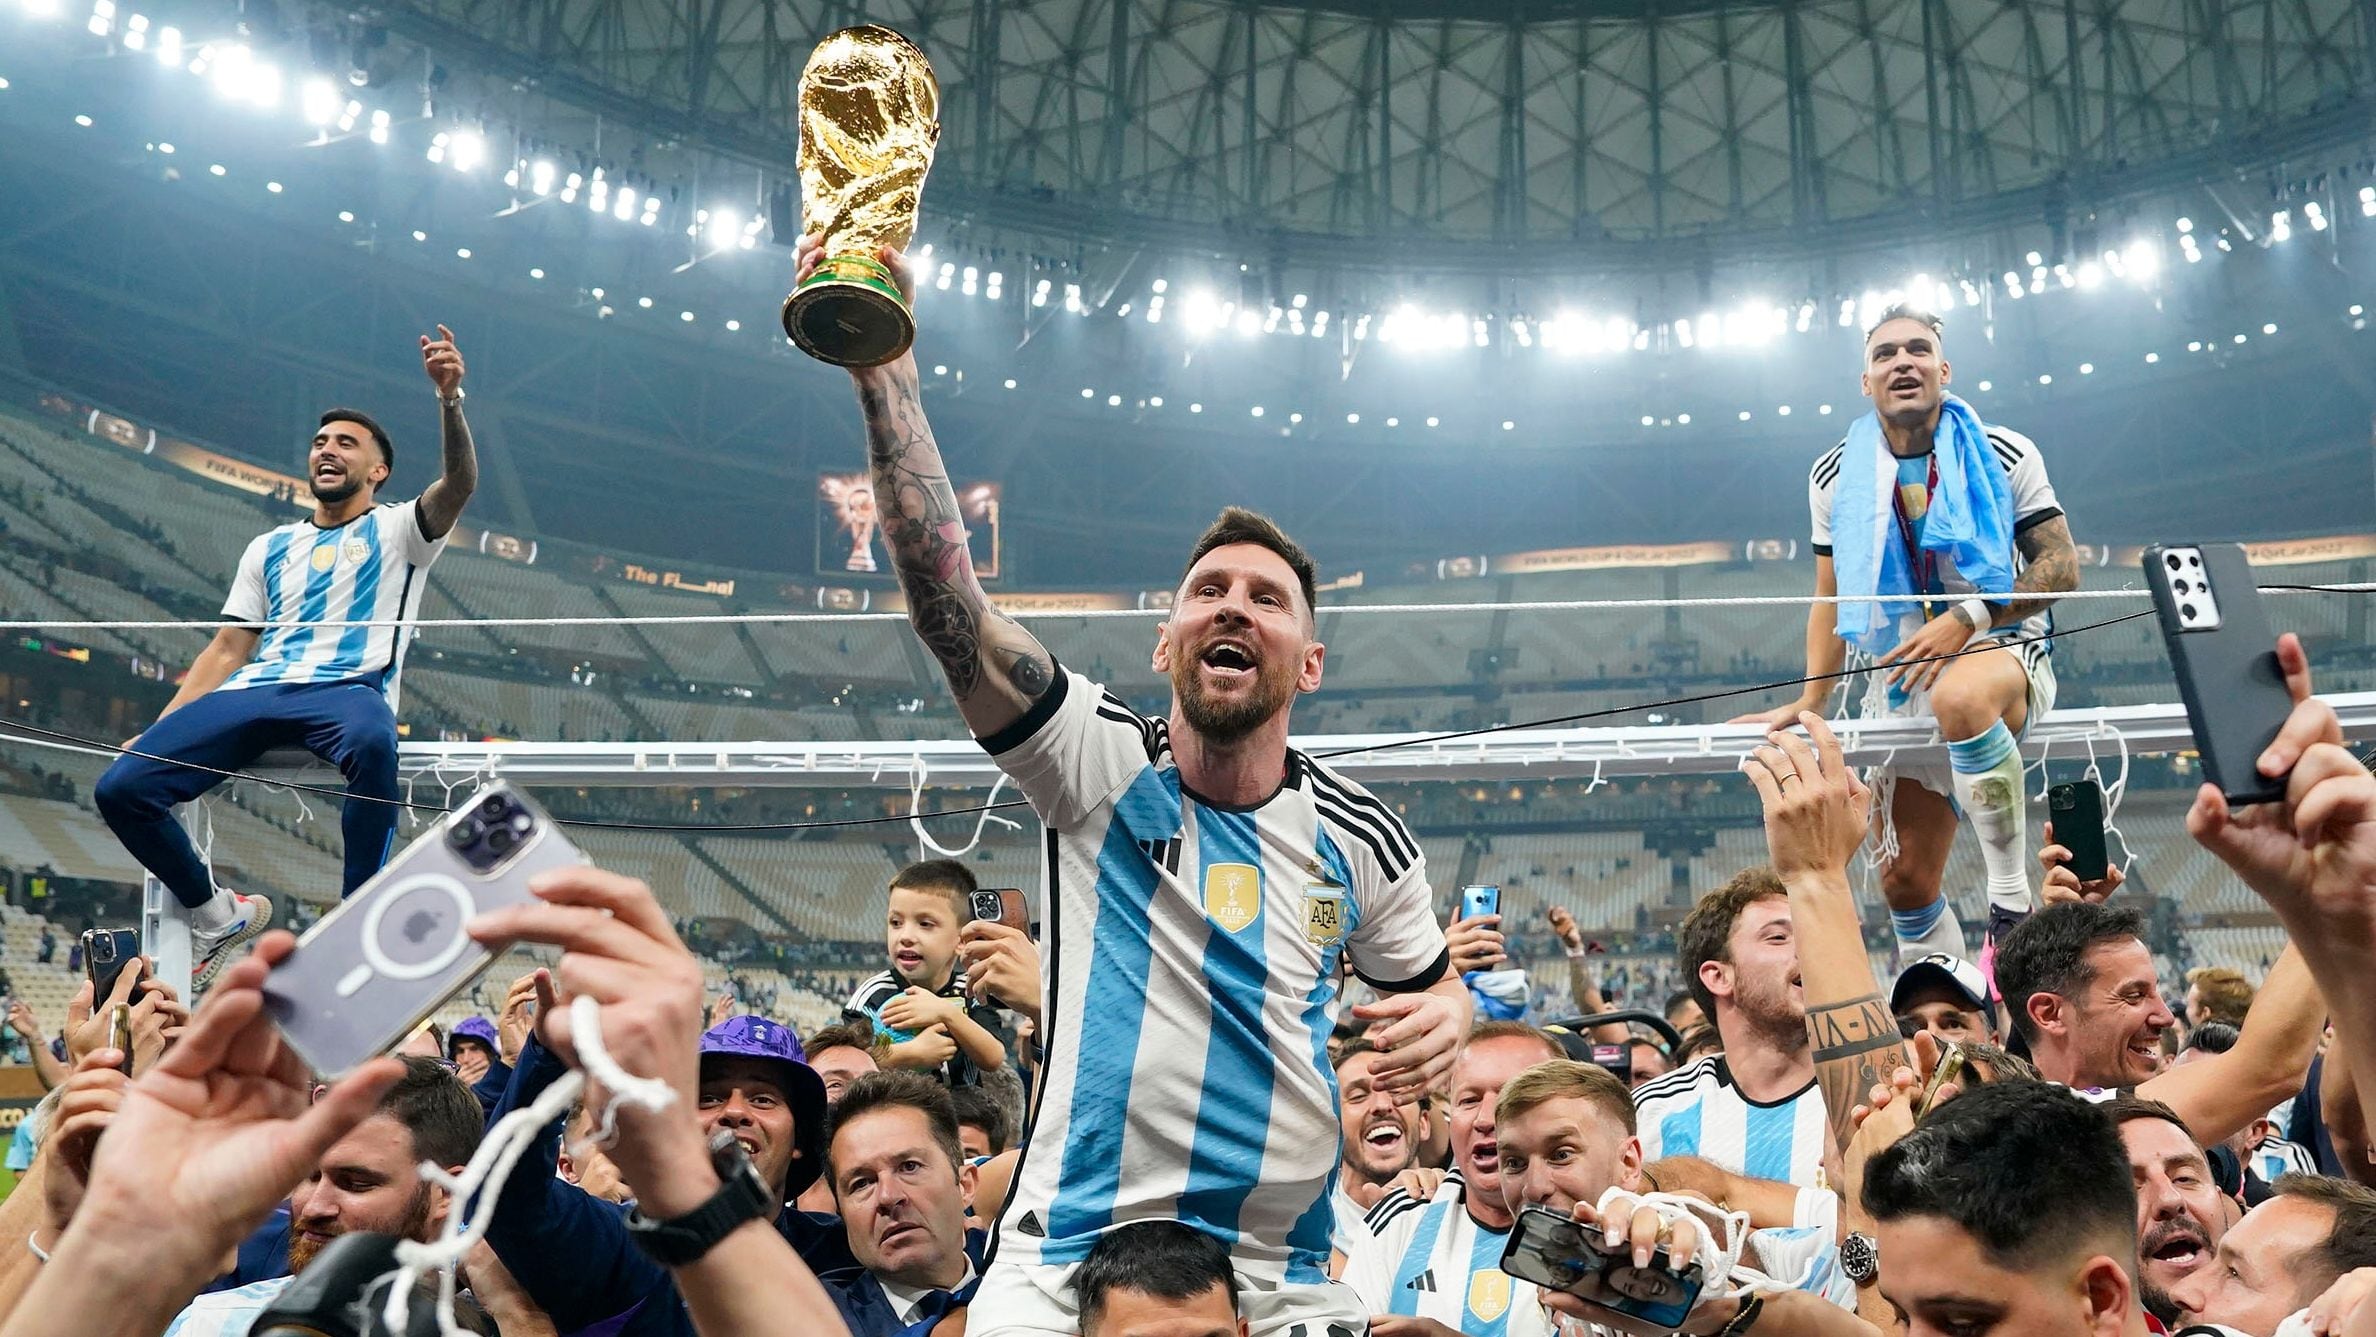 Lionel Messi: A breakdown of his World Cup and career highlights